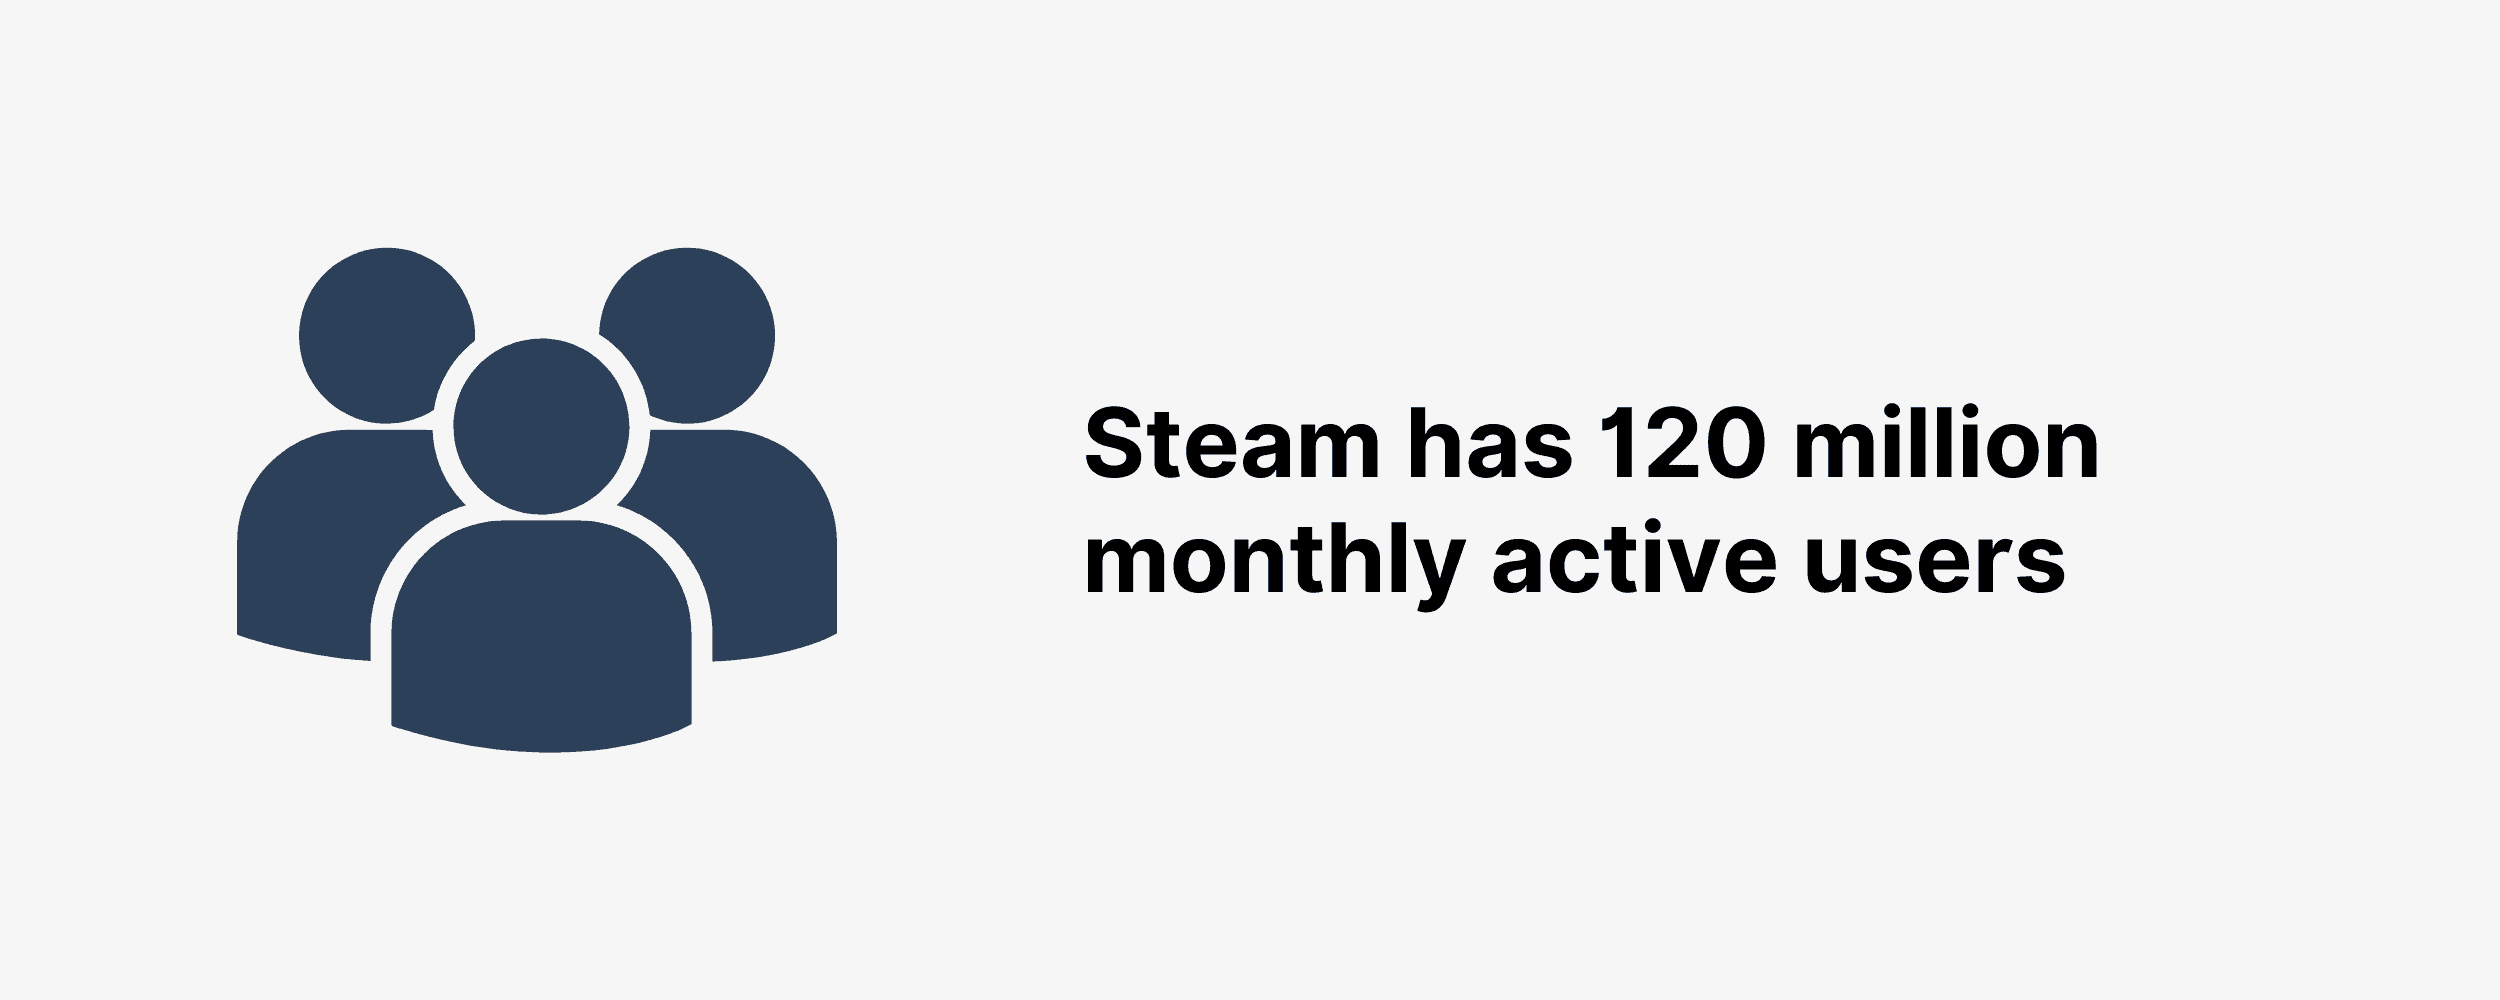 Steam has 120 million monthly active users